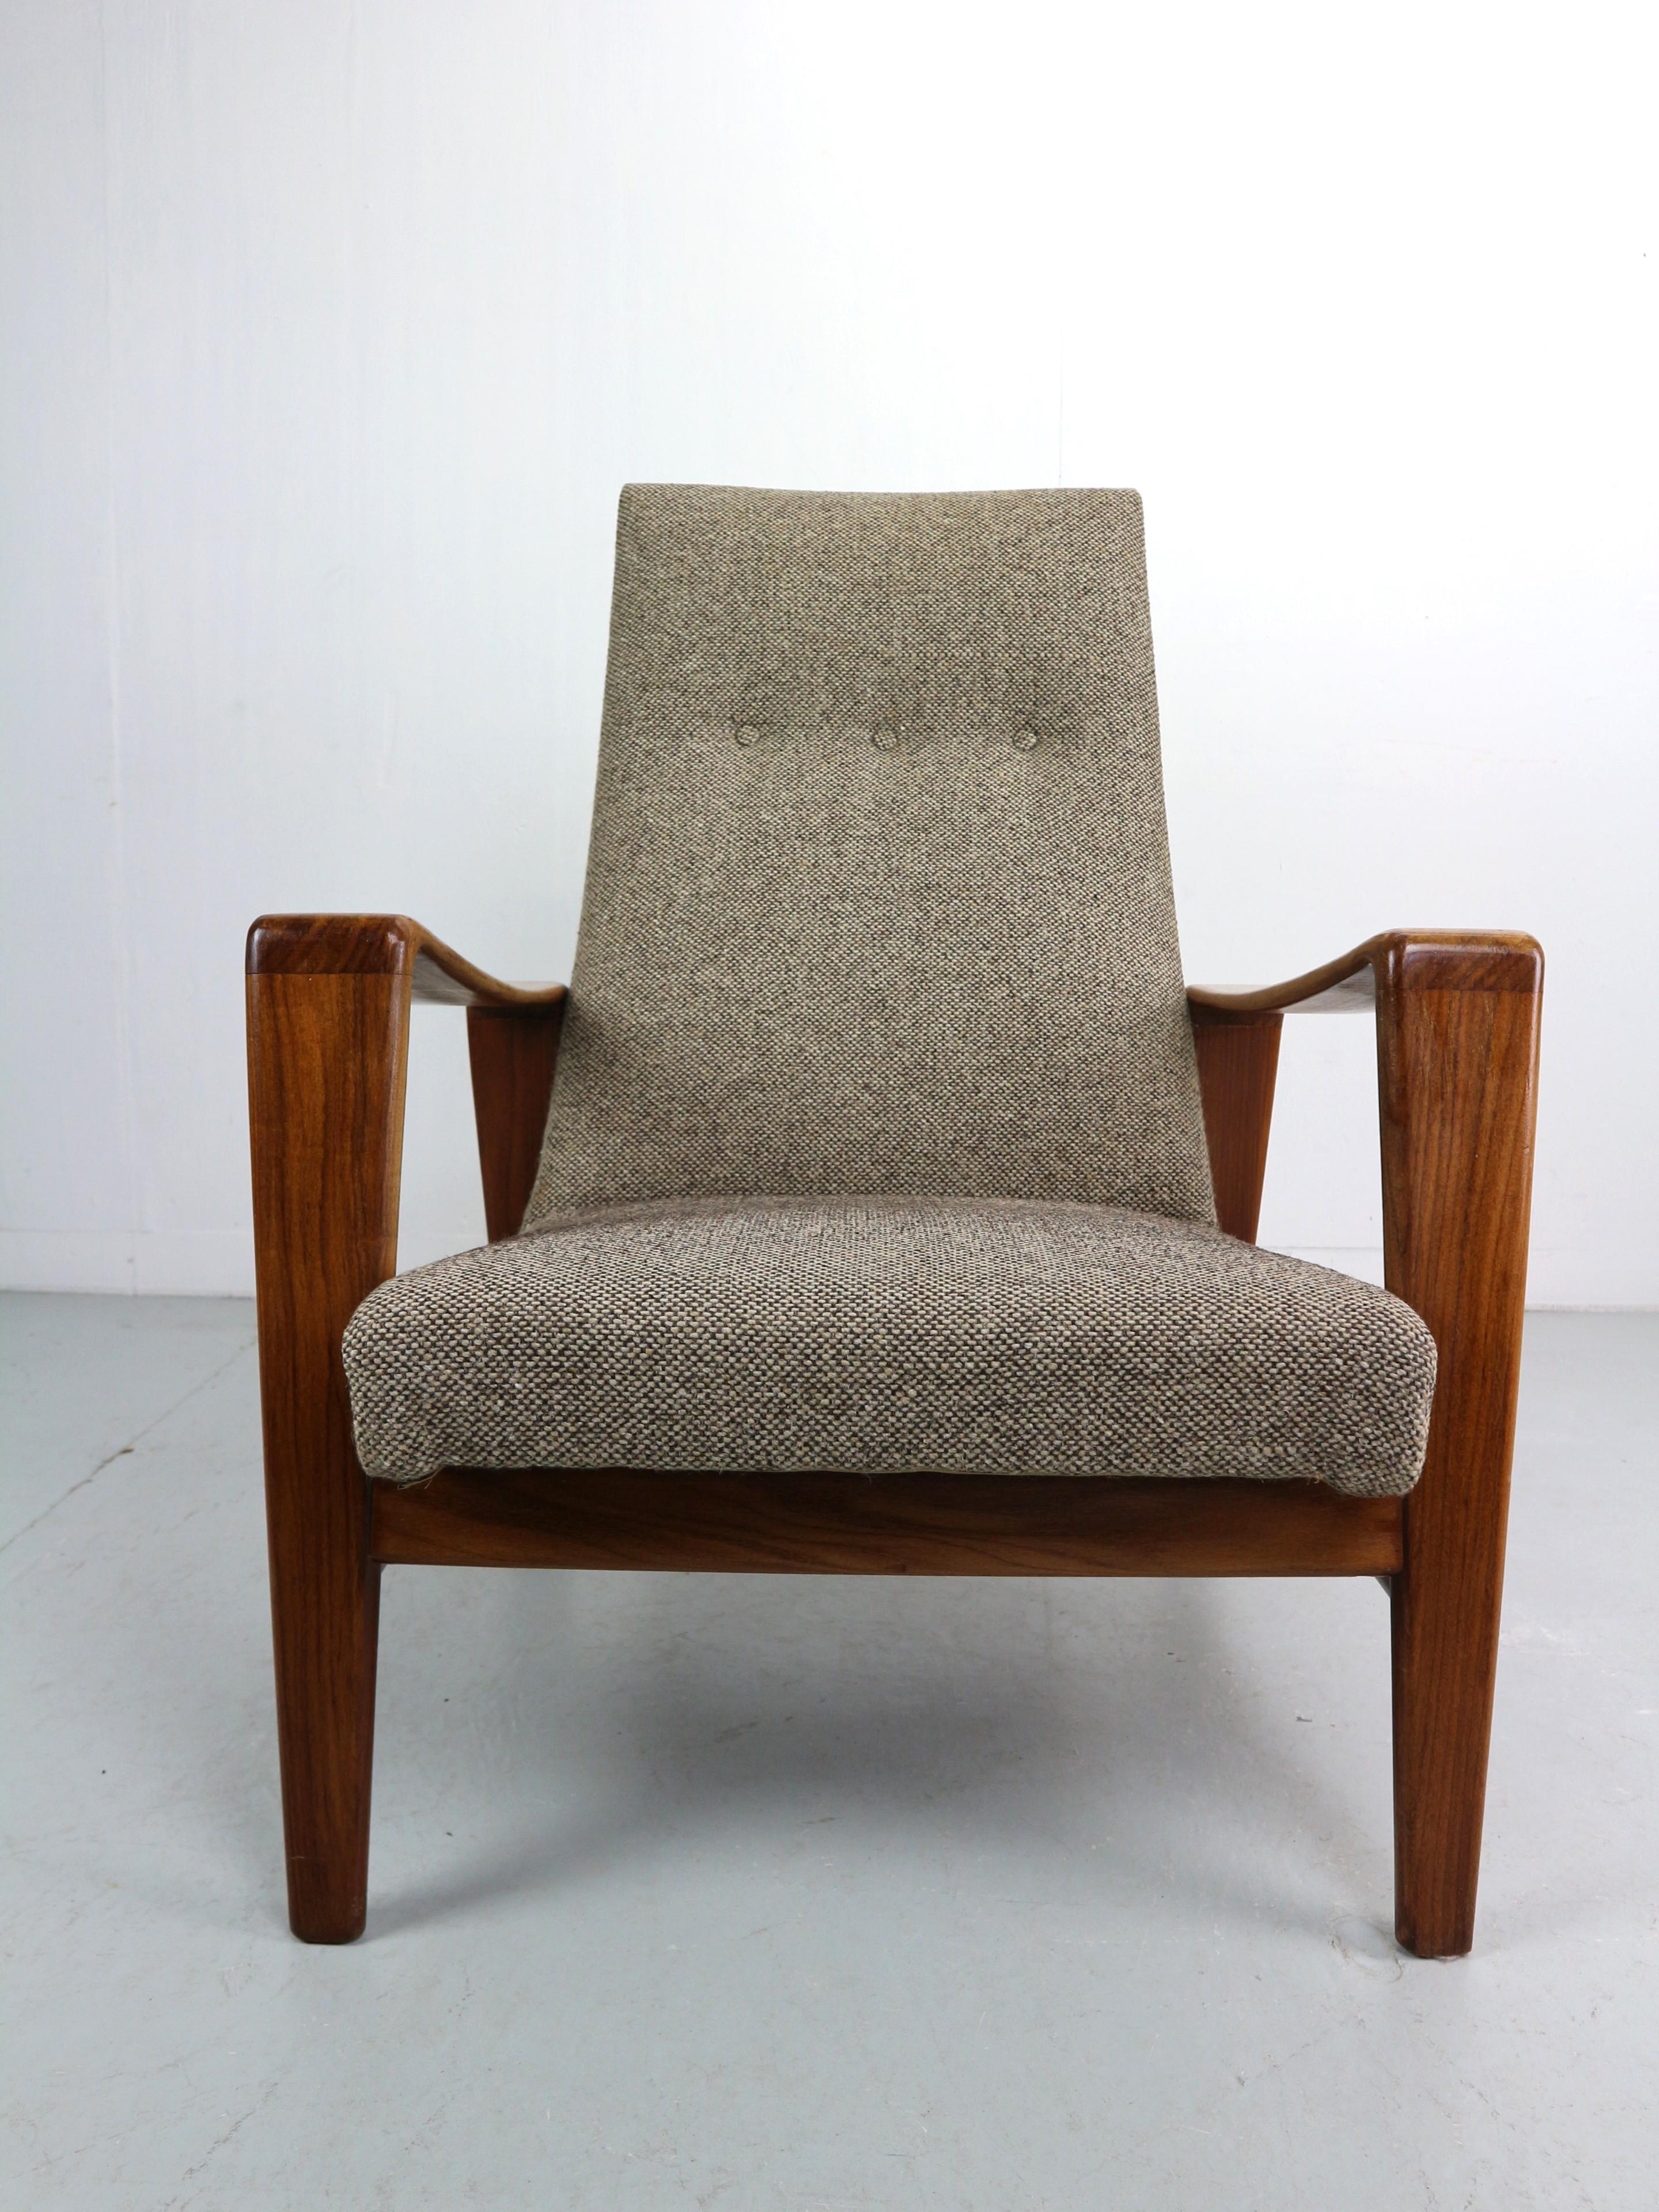 Mid-Century Modern Lounge Chair by Arne Wahl Iversen for Komfort, 1960s For Sale